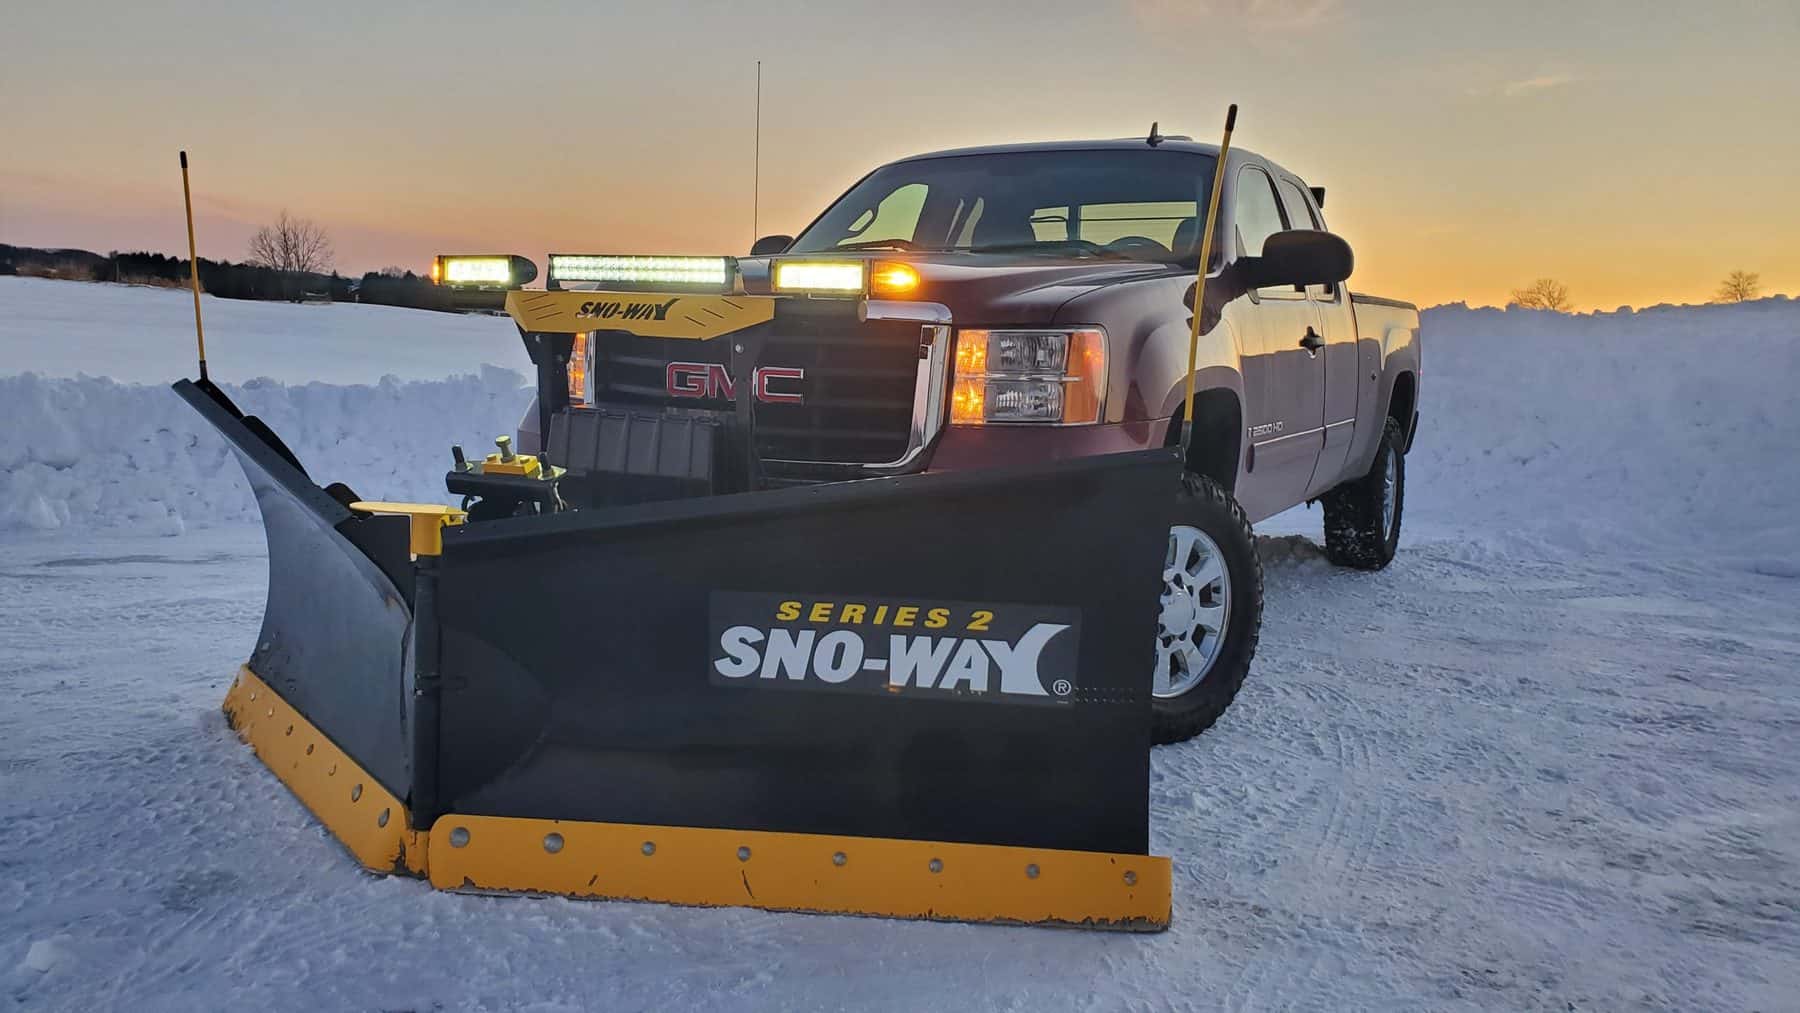 29VHD Snow Plow on a red GMC 2500 truck